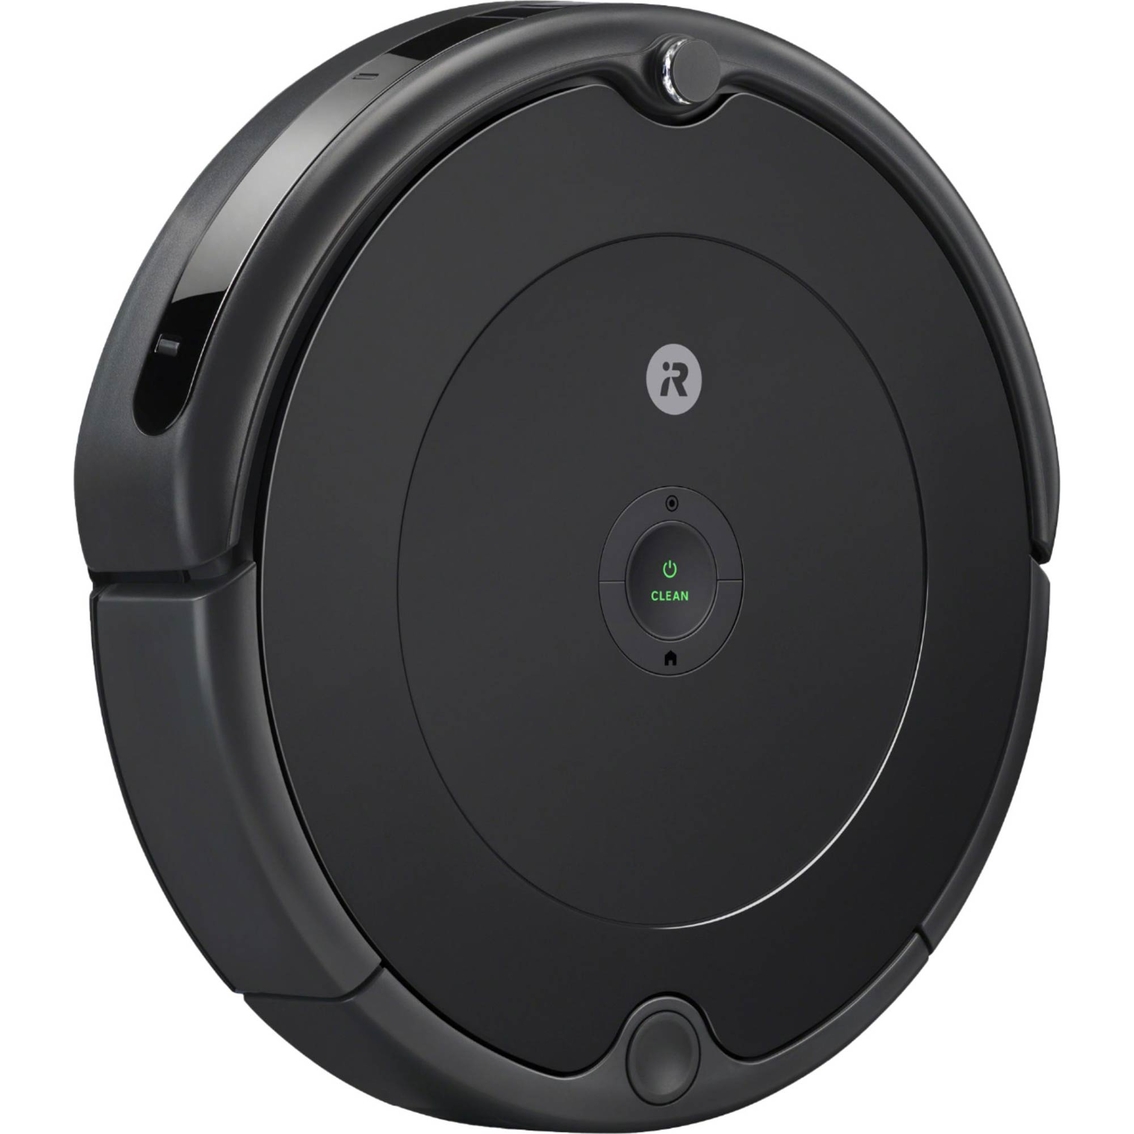 iRobot Roomba 694 Wi-Fi Connected Robot Vacuum - Image 2 of 5